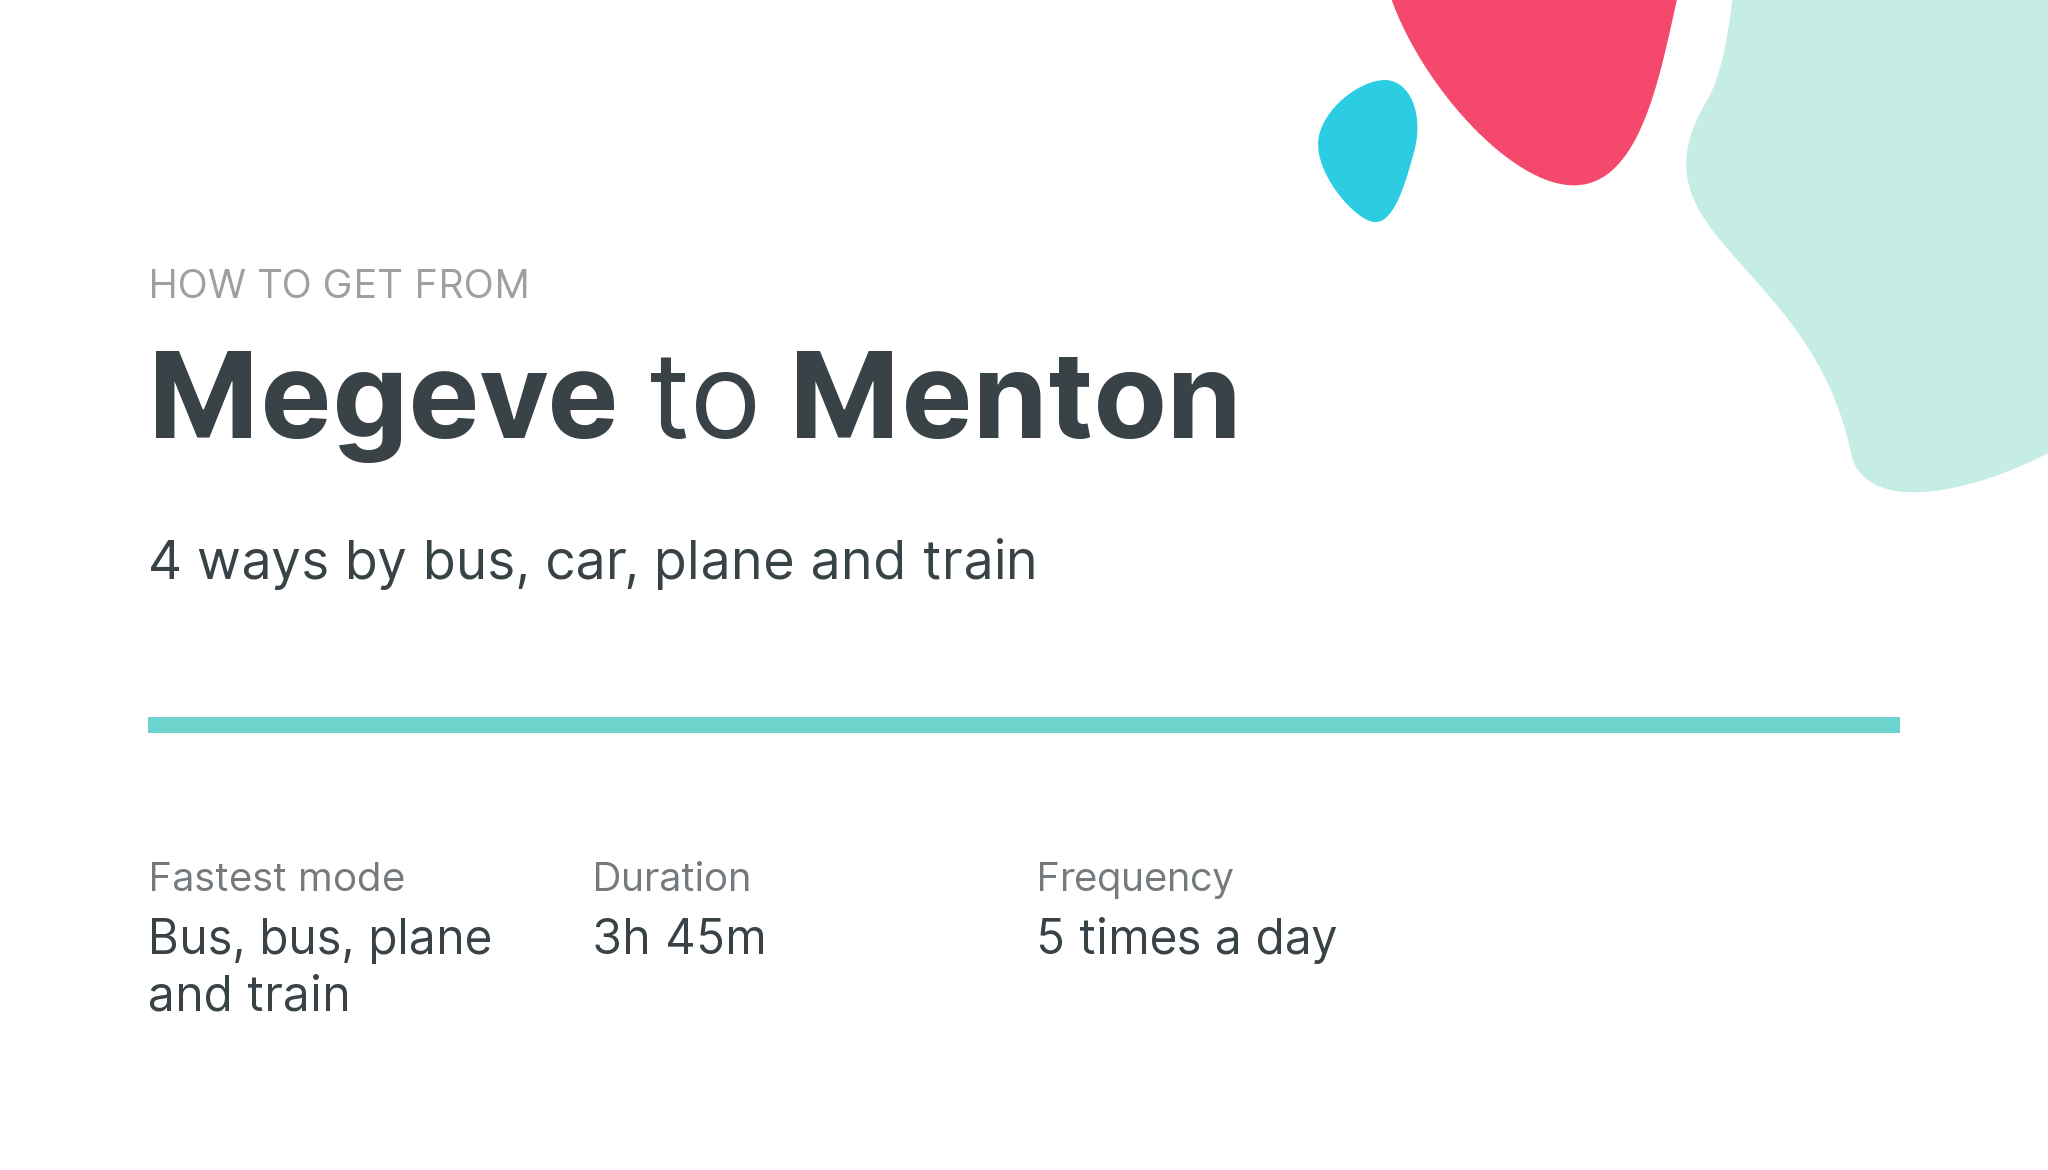 How do I get from Megeve to Menton